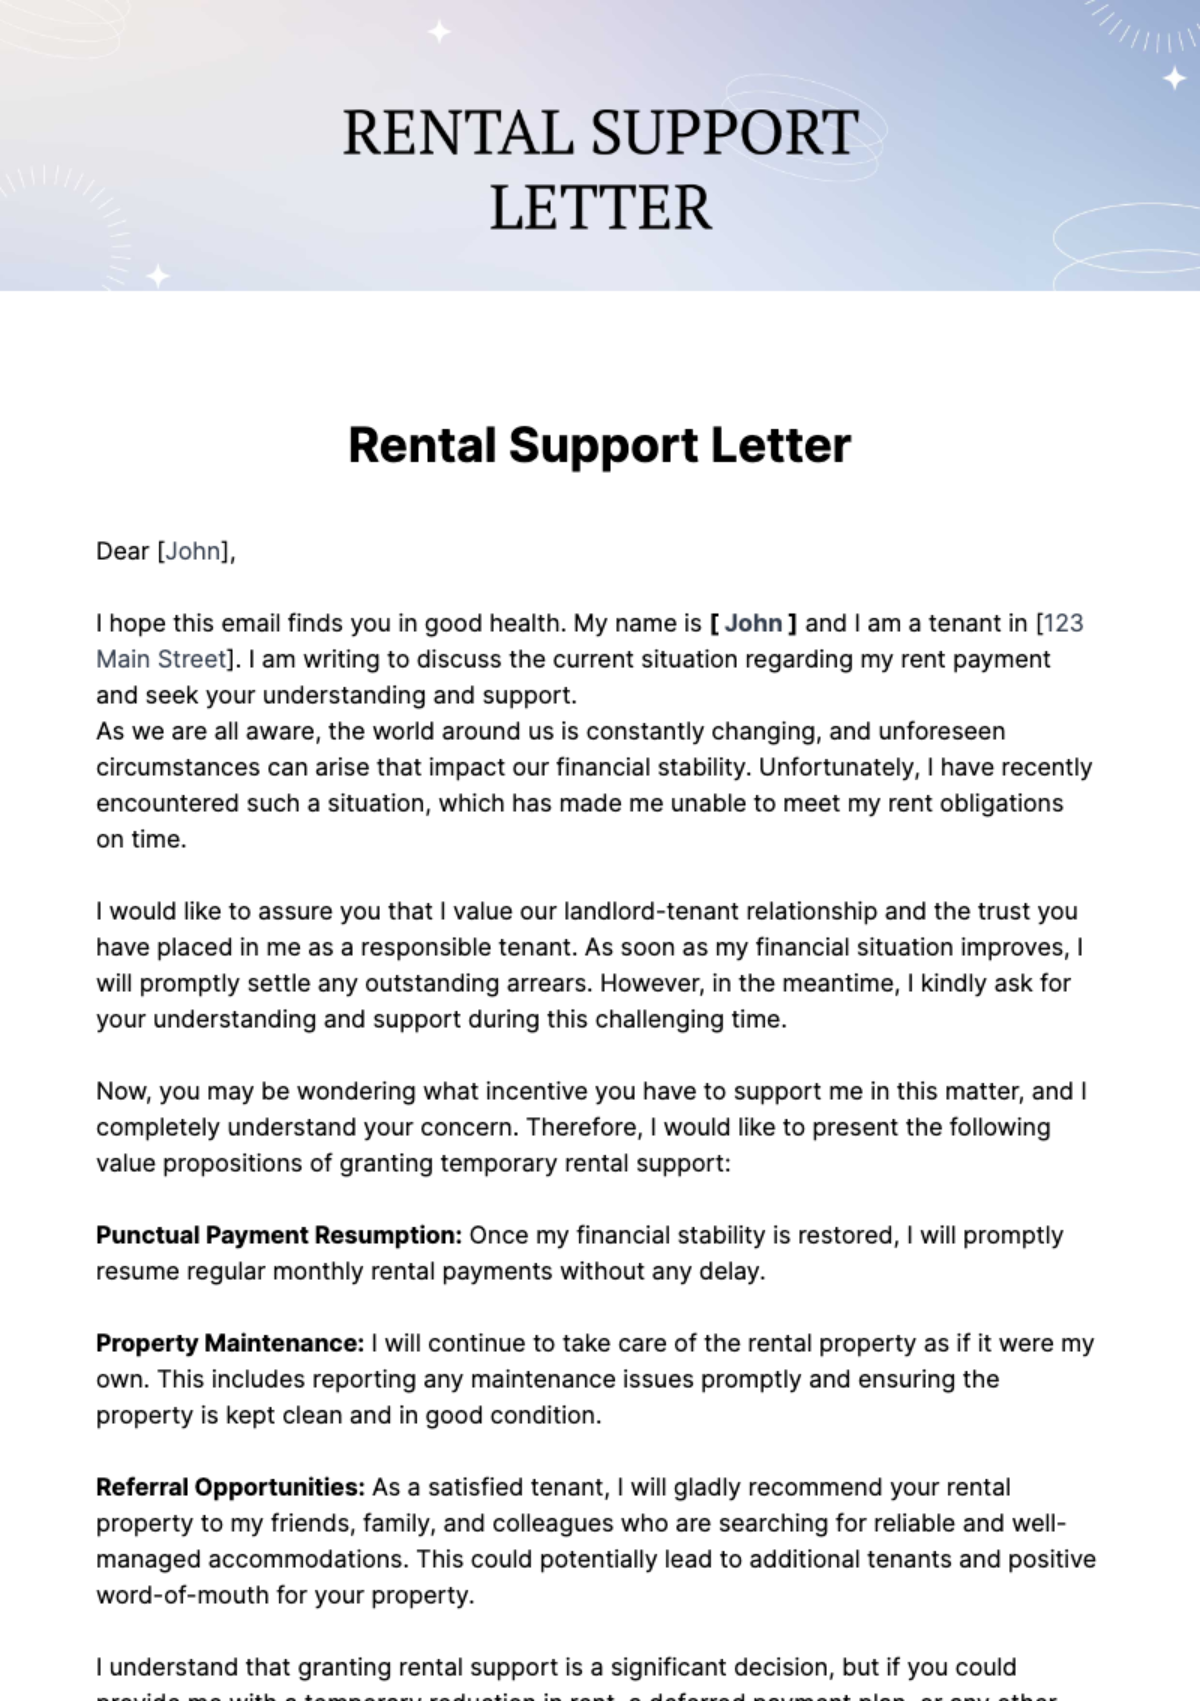 Free Rental Support Letter Template